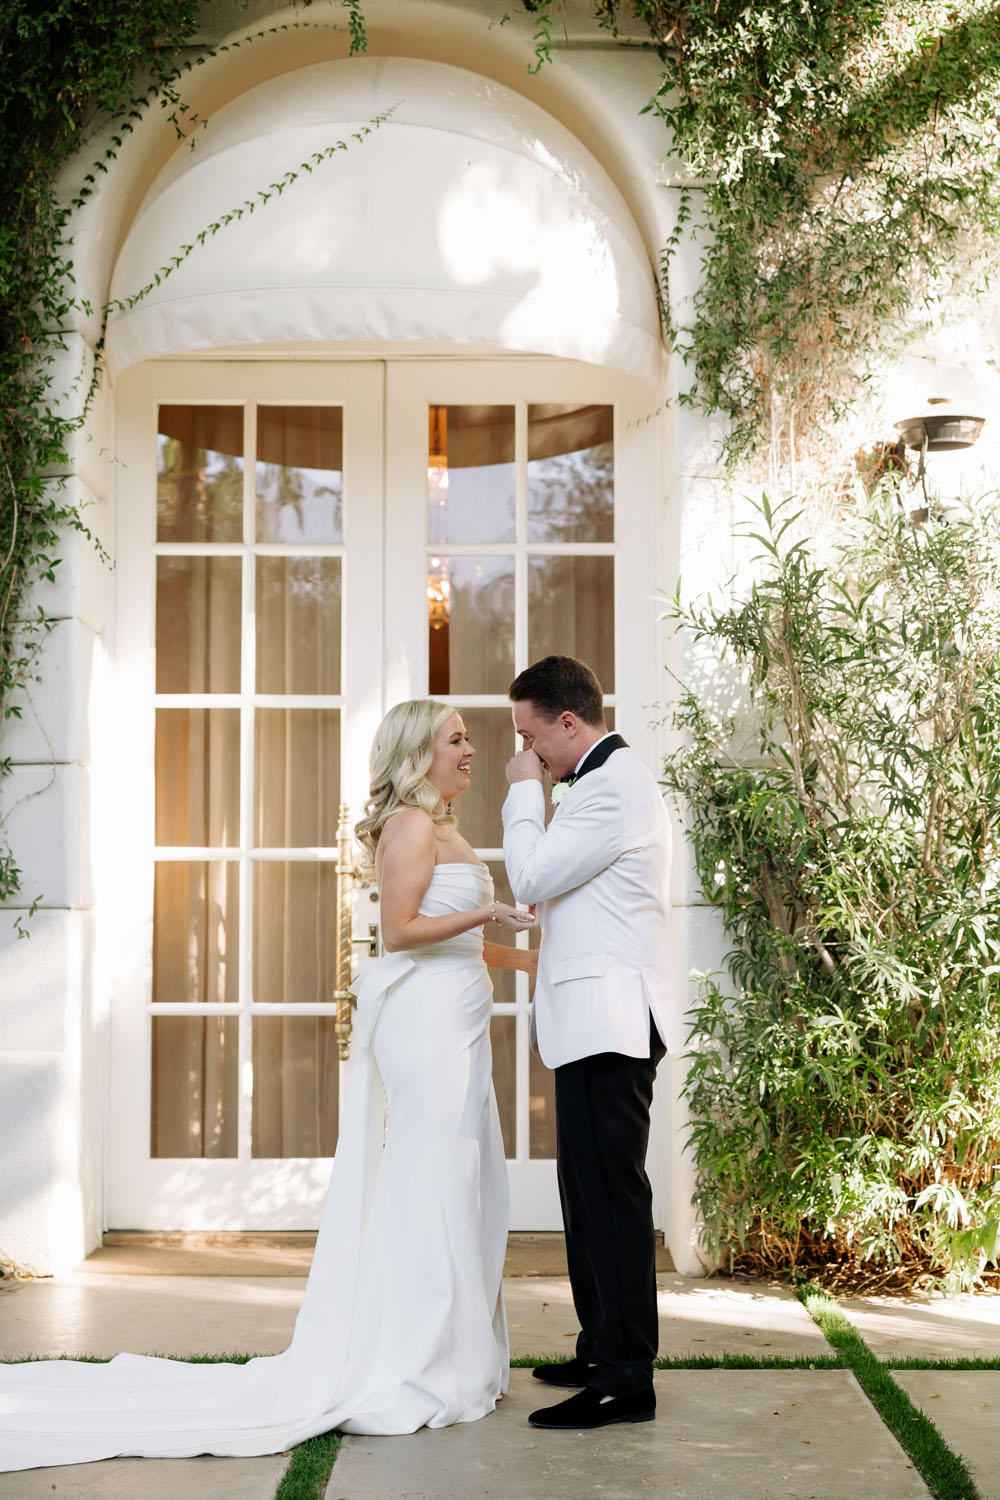 Bride and groom's first look at Parker Palm Springs hotel wedding